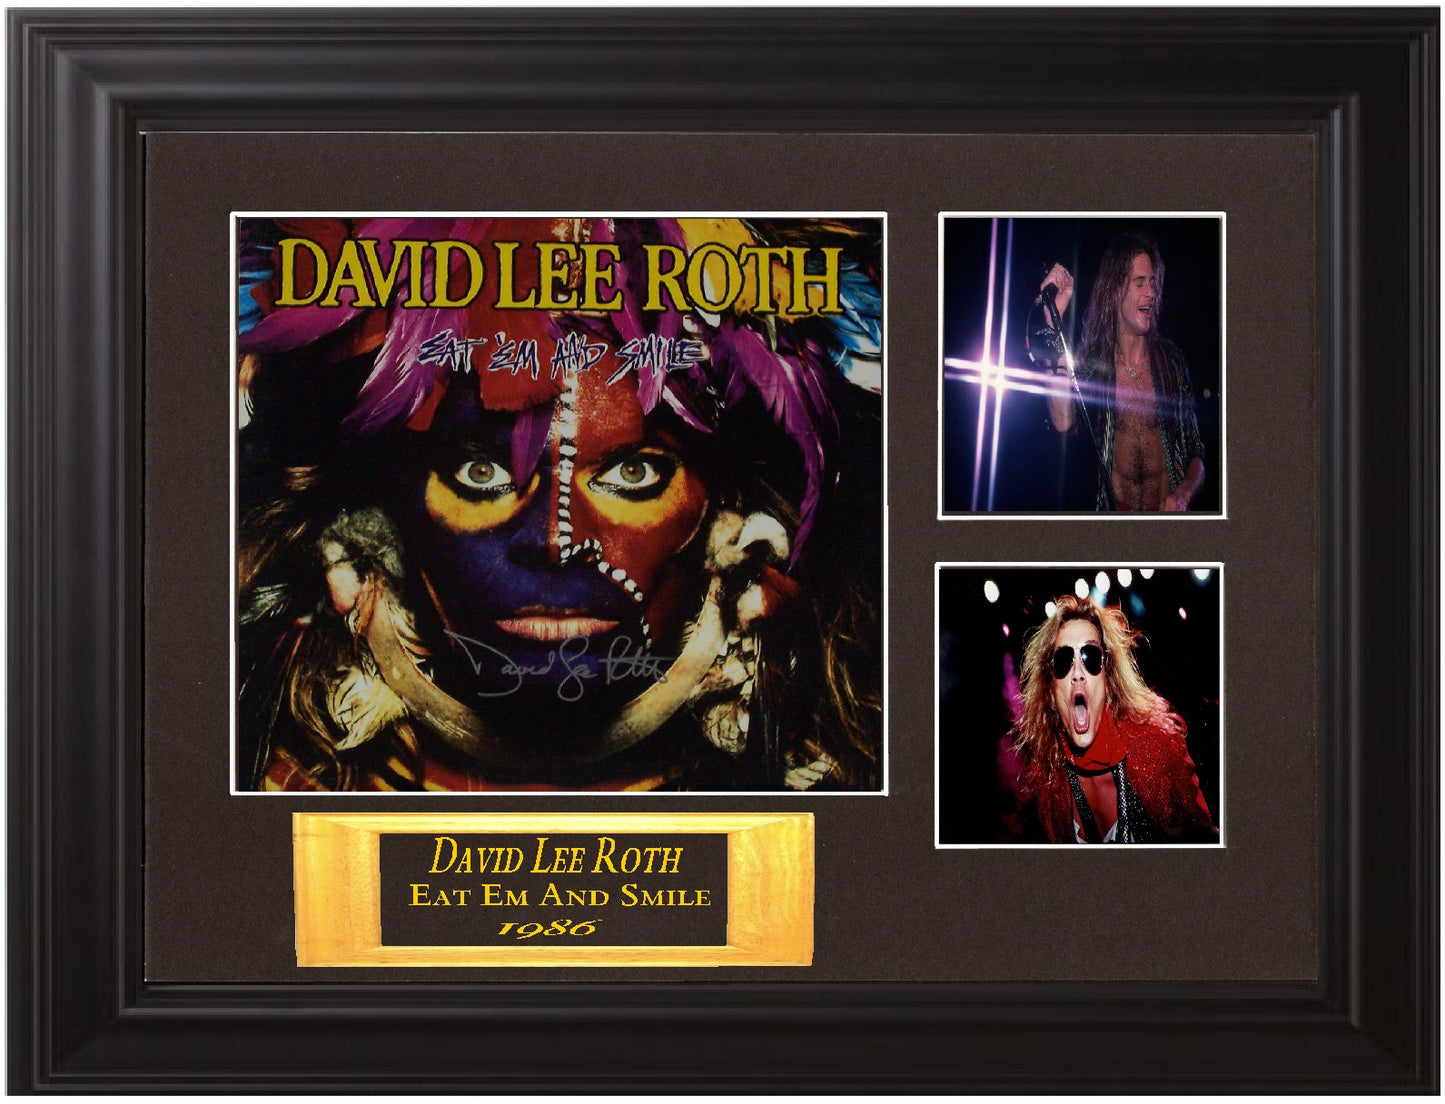 David Lee Roth Autographed Lp "Eat 'Em and Smile" - Zion Graphic Collectibles